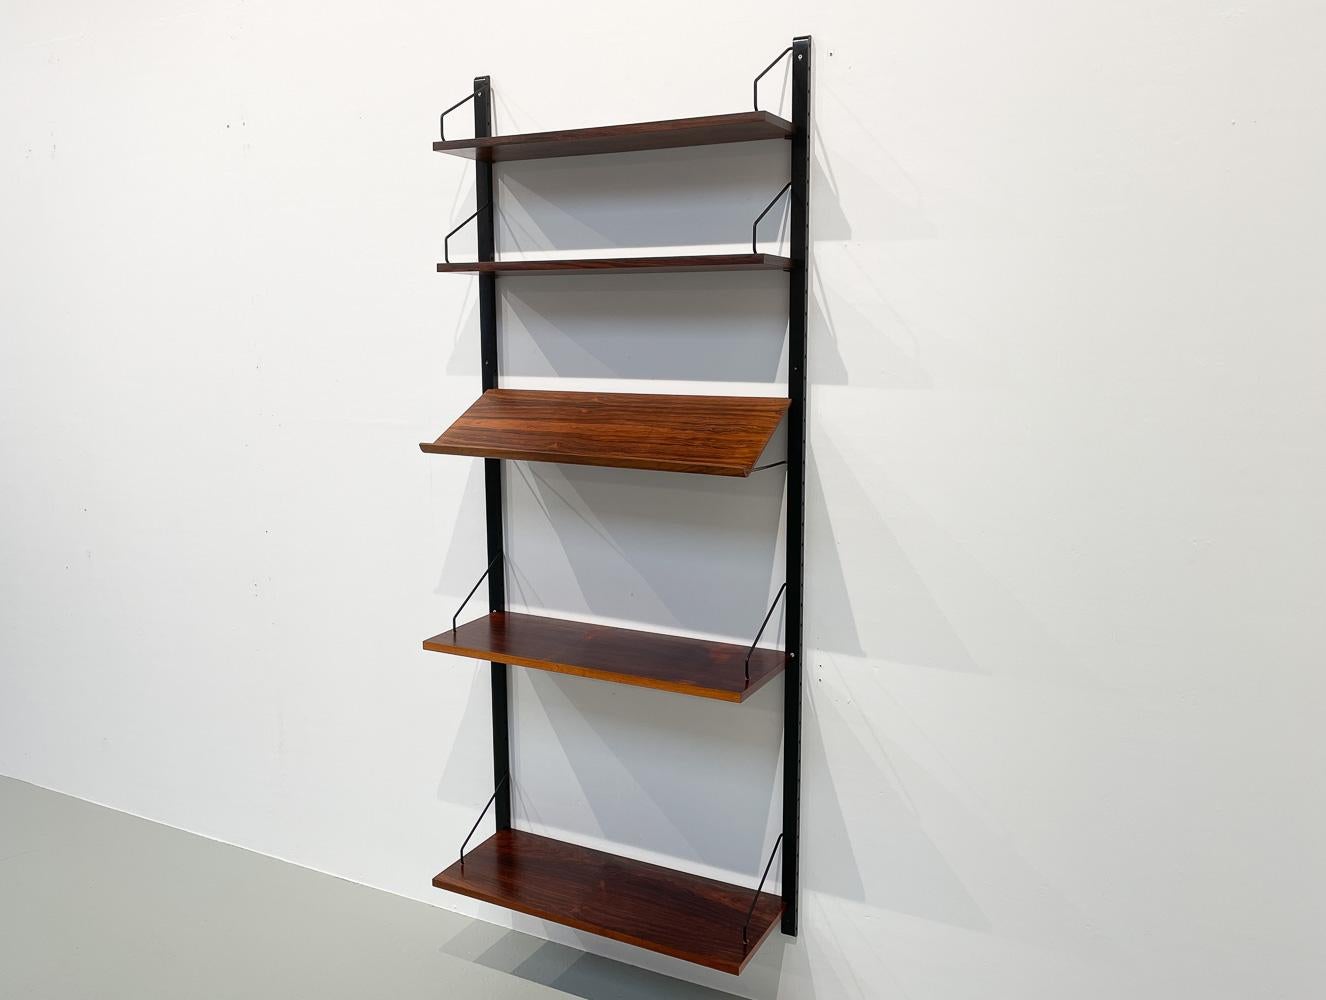 Vintage Danish rosewood wall unit by Poul Cadovius for Cado, 1960s.

Mid-Century Modern 1 bay shelving system model Royal. This is a original vintage floating bookcase designed in 1948 by Danish architect Poul Cadovius. 
Cadovius had the